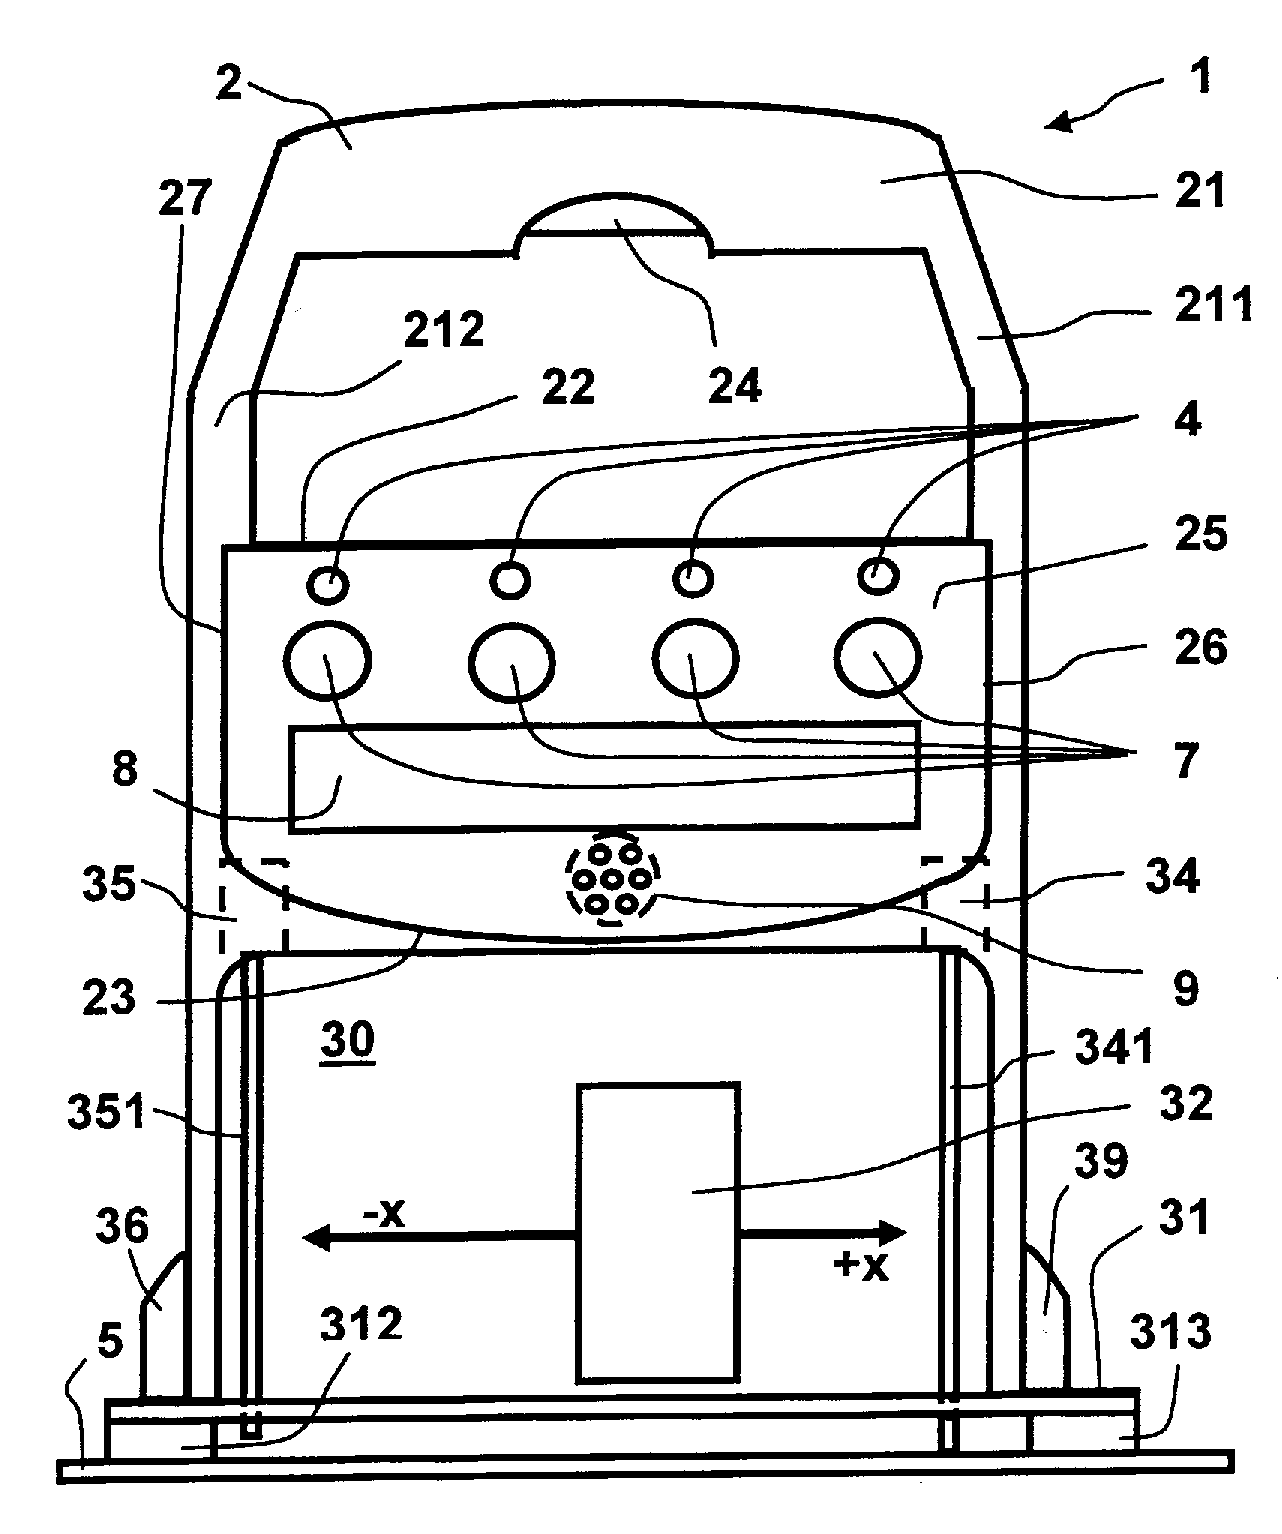 Universally usable electronic manual stamping device